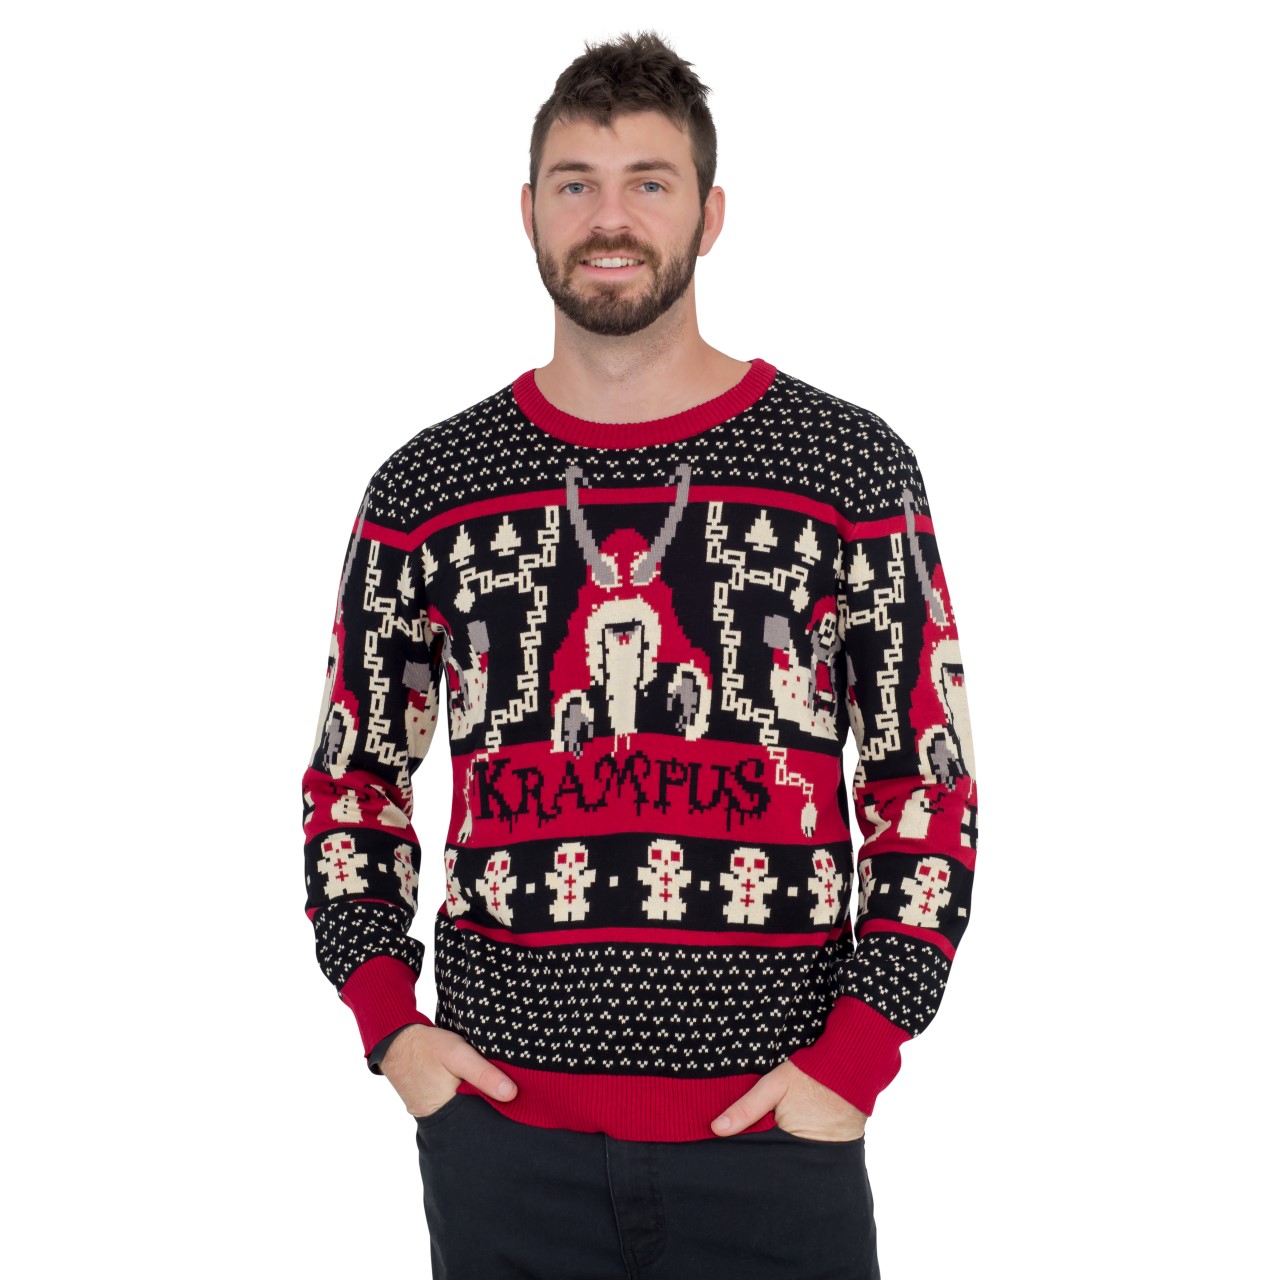 Krampus Knit Ugly Christmas Sweater,New Products : uglyschristmassweater.com